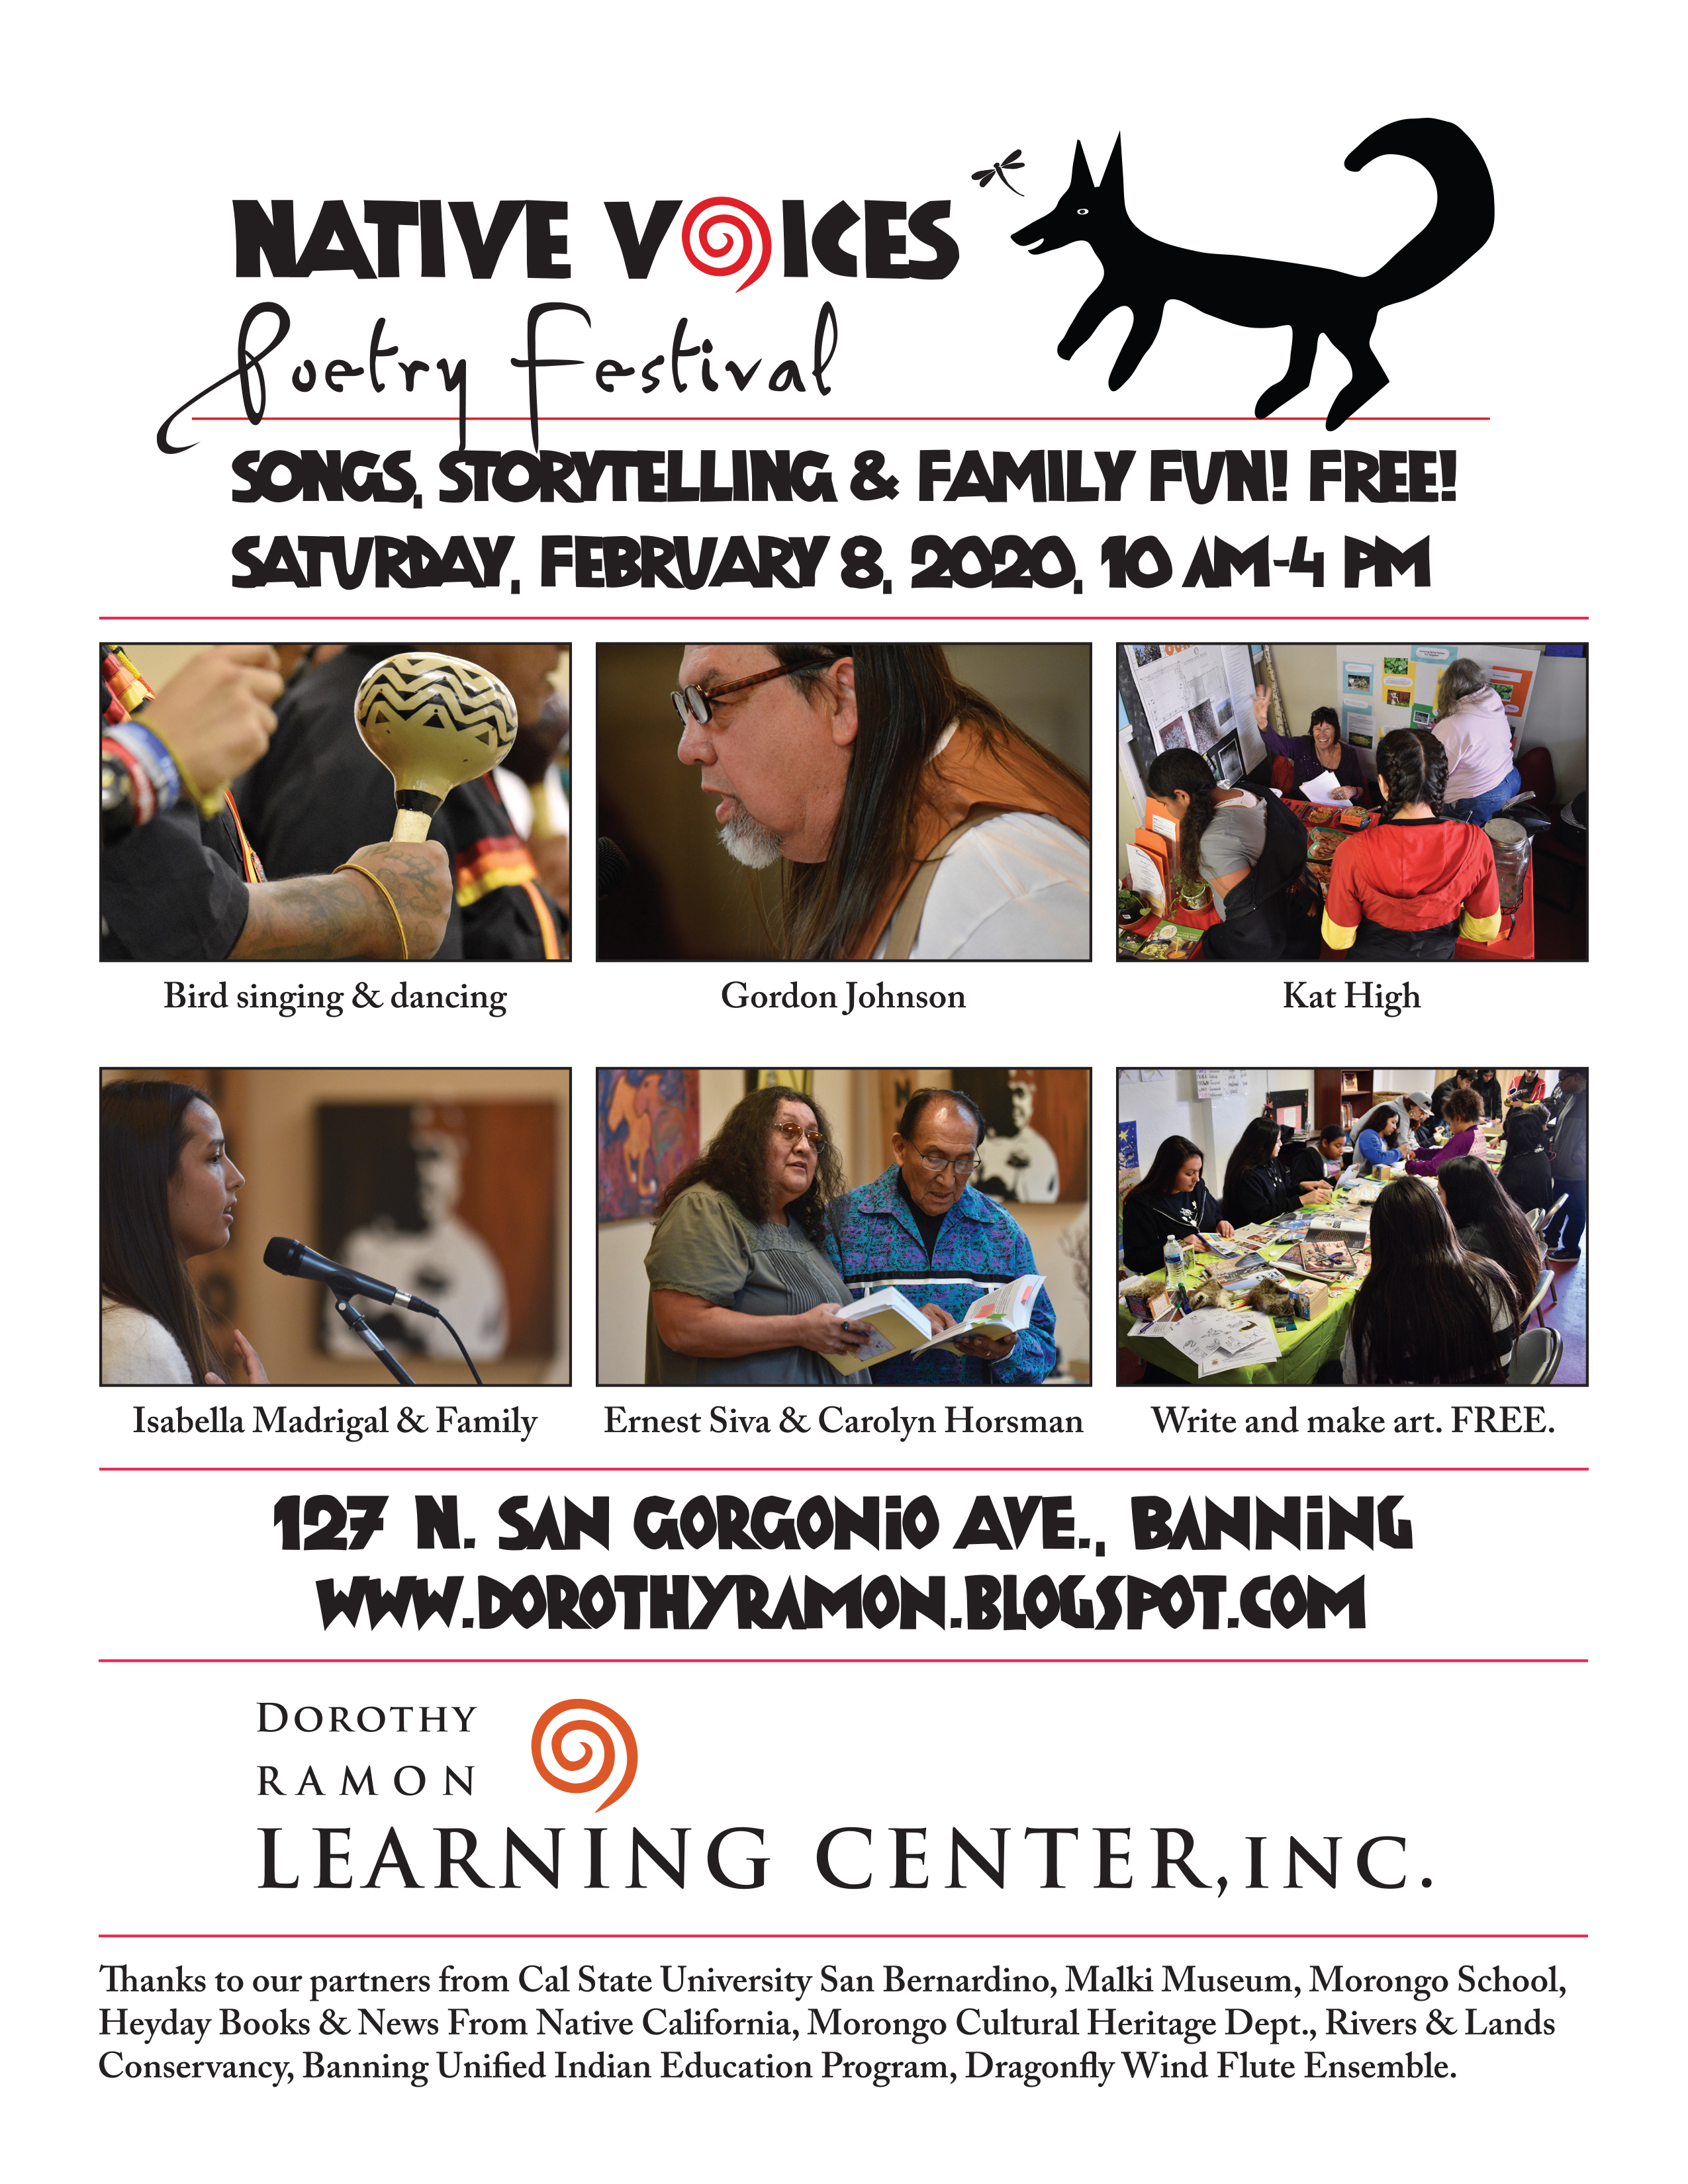 Annual Native Voices Poetry Festival set for Feb. 8 at Dorothy Ramon Learning Center in Banning